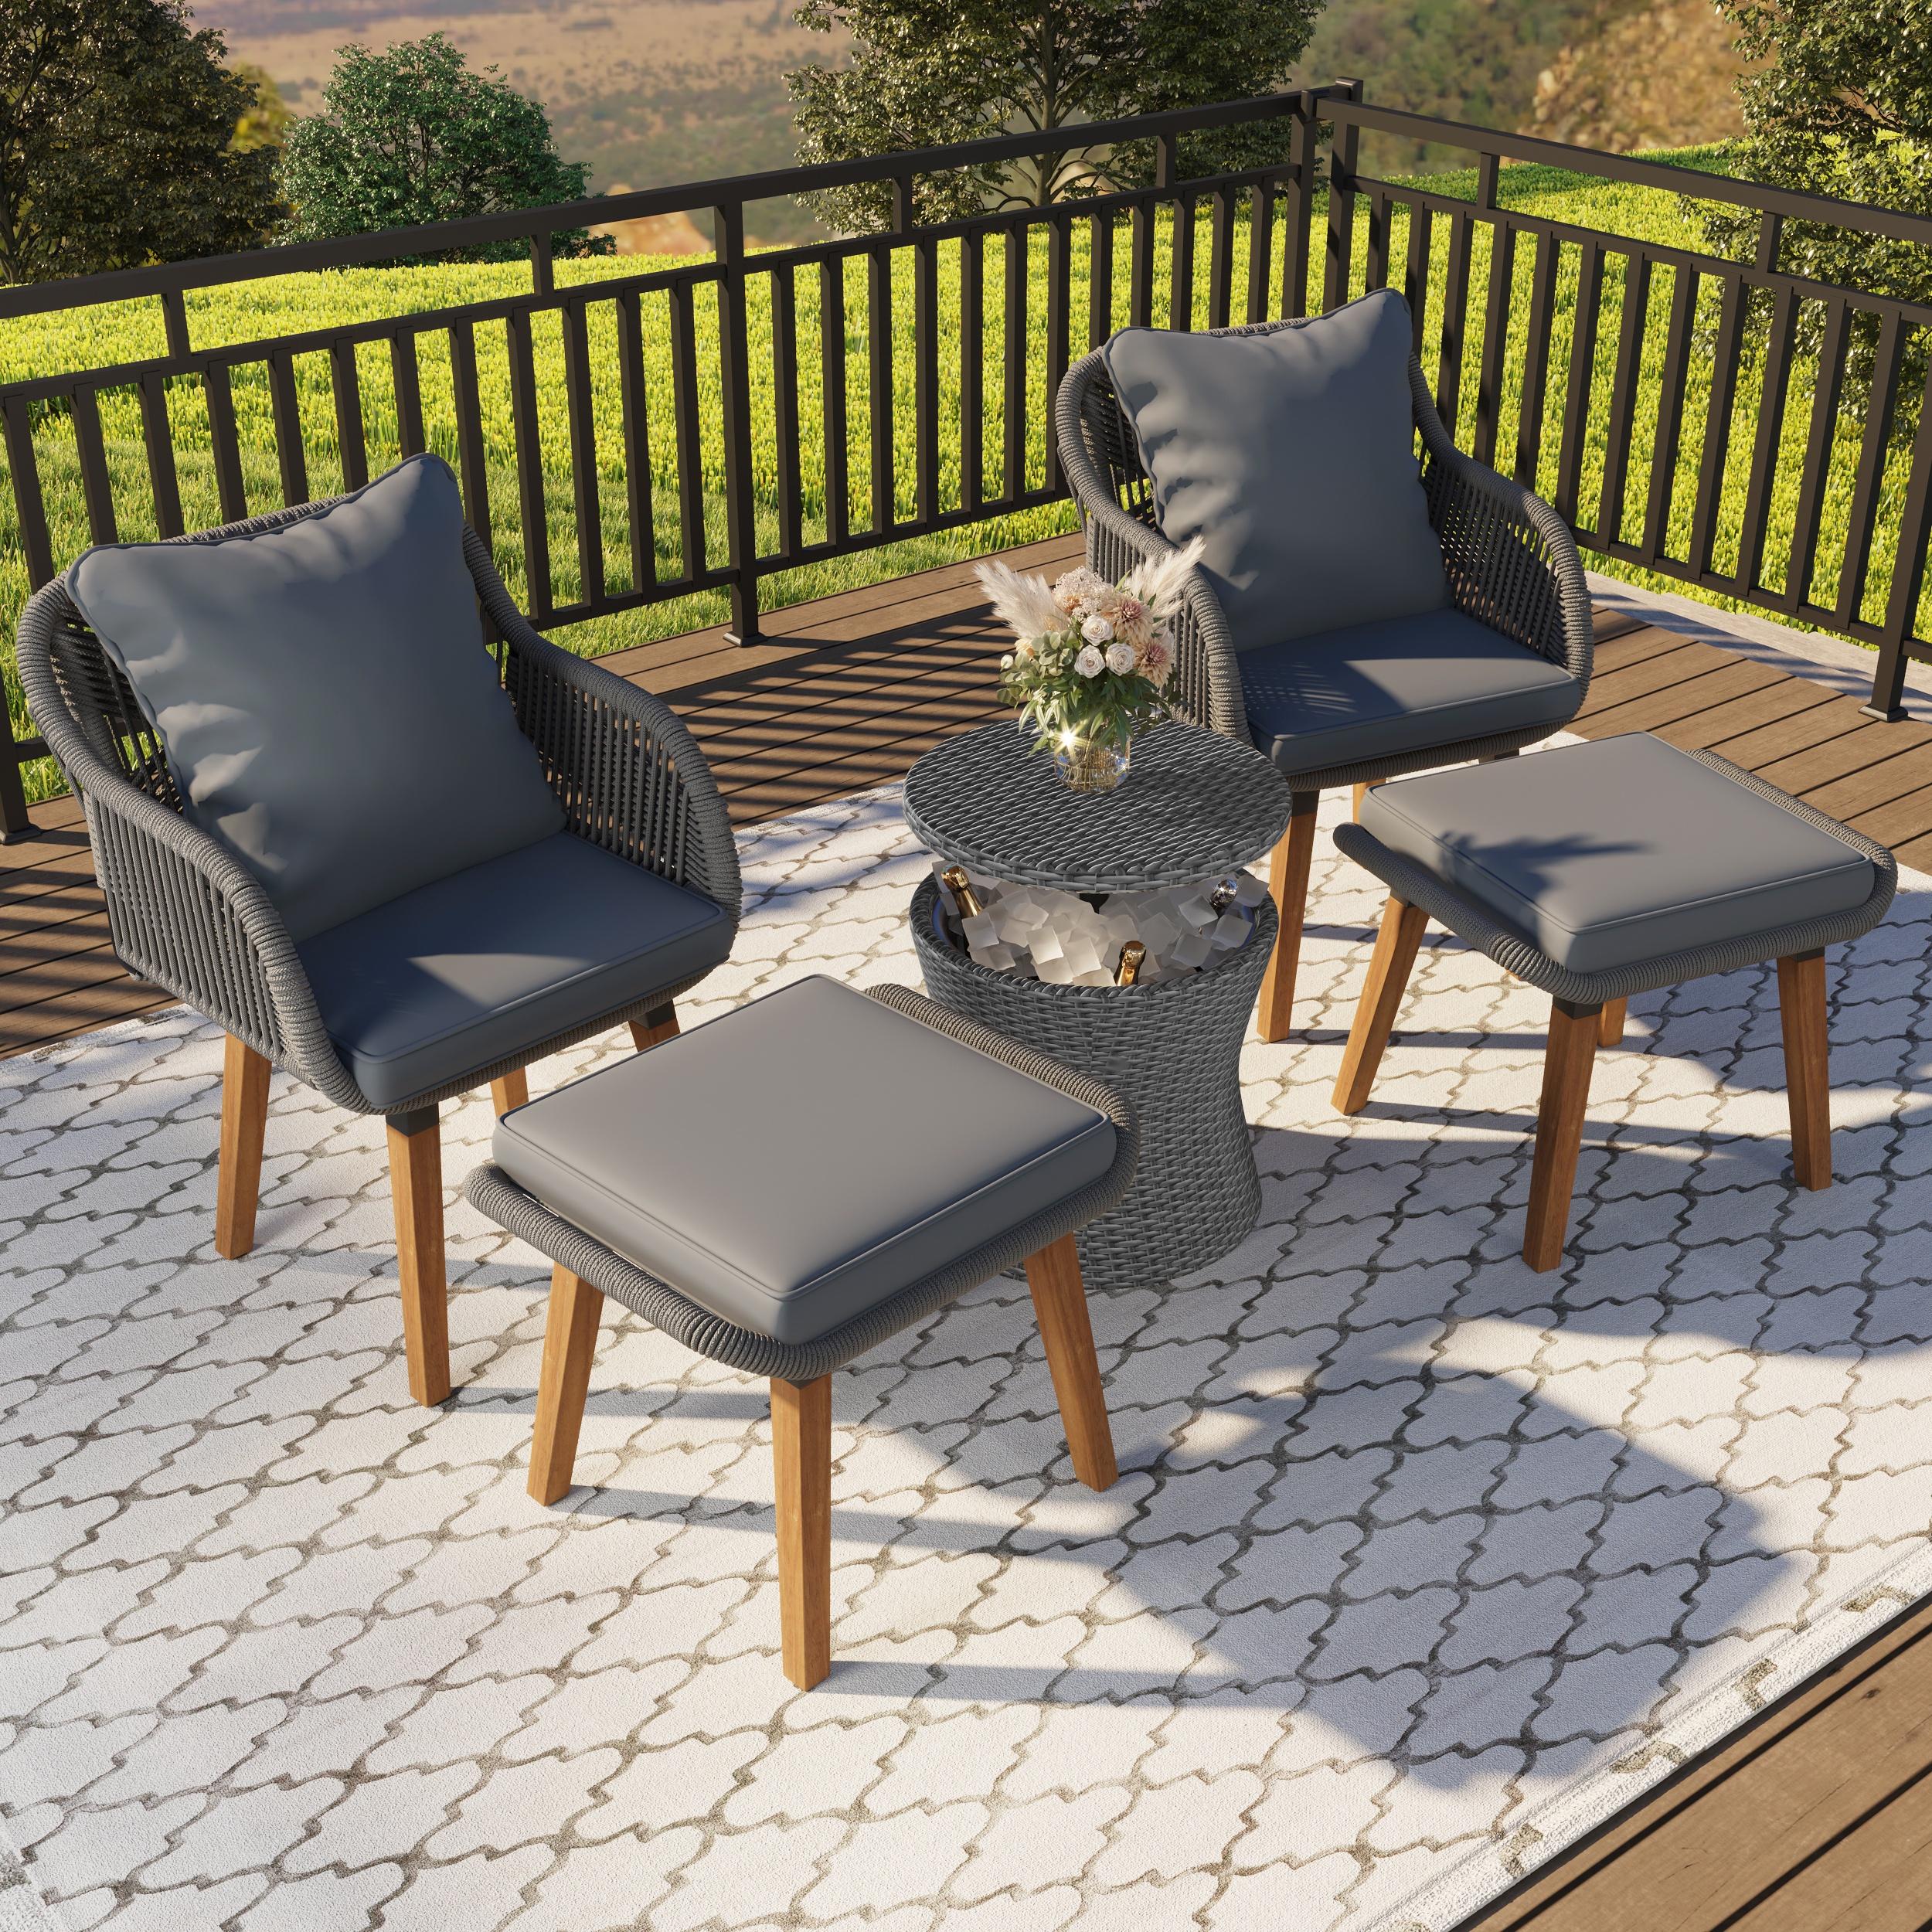 SYNGAR Patio Wicker Chairs Set, 5 PCS Patio Furniture Set with Coffee Table, Ottoman Footrest and Gray Cushions, Outside Sectional Sofa Set, Porch Balcony Lawn Pool Conversation Set, GE037 - image 2 of 11